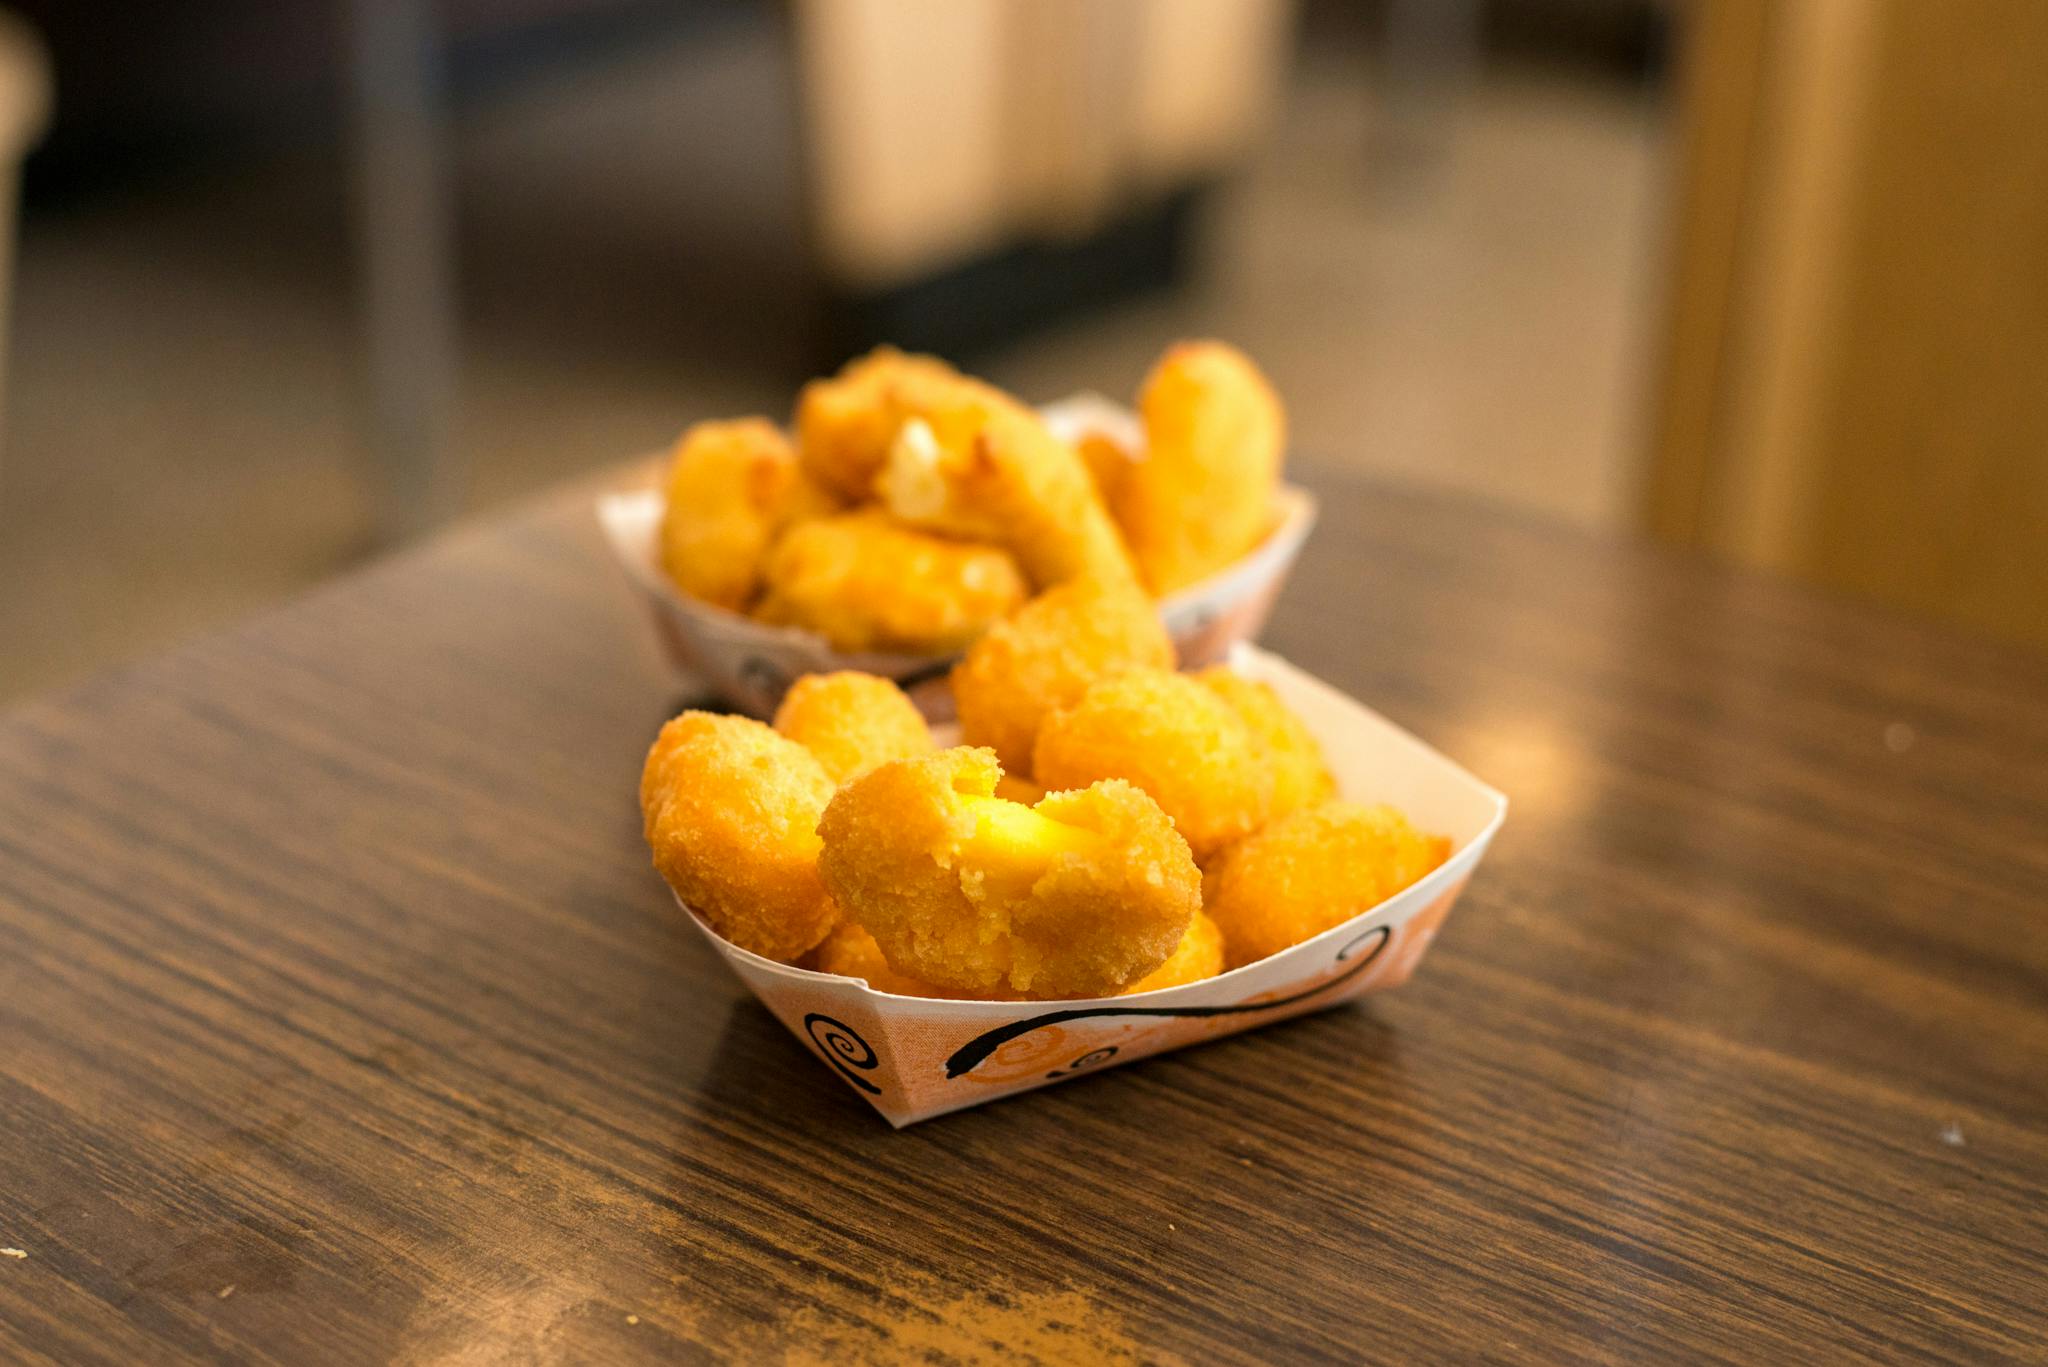 Cheese Curds from Kroll's East in Green Bay, WI